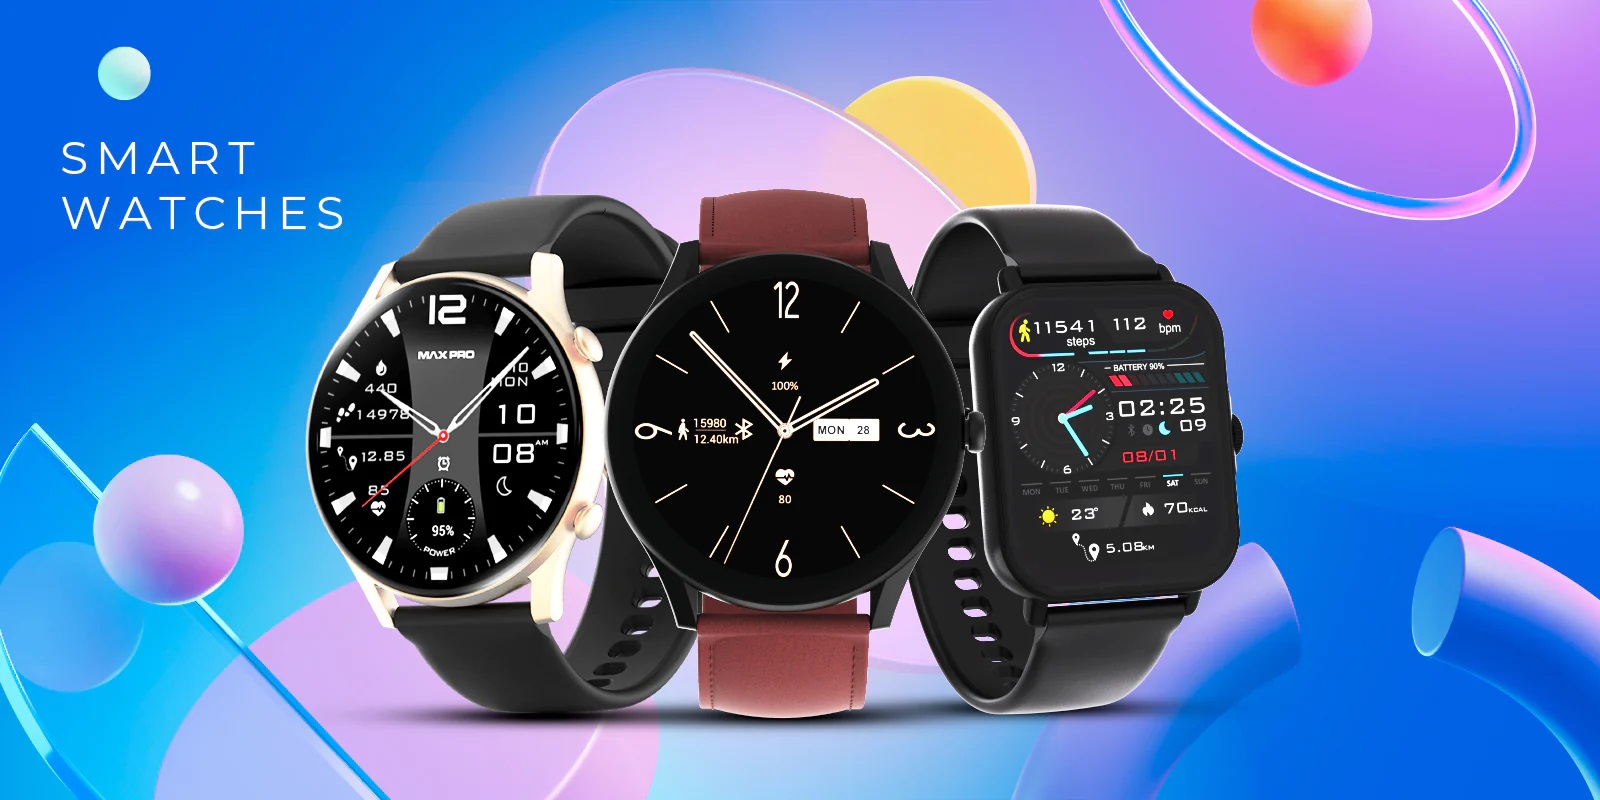 Get quality Smart Watch device for healthy lifestyle | NewsDark